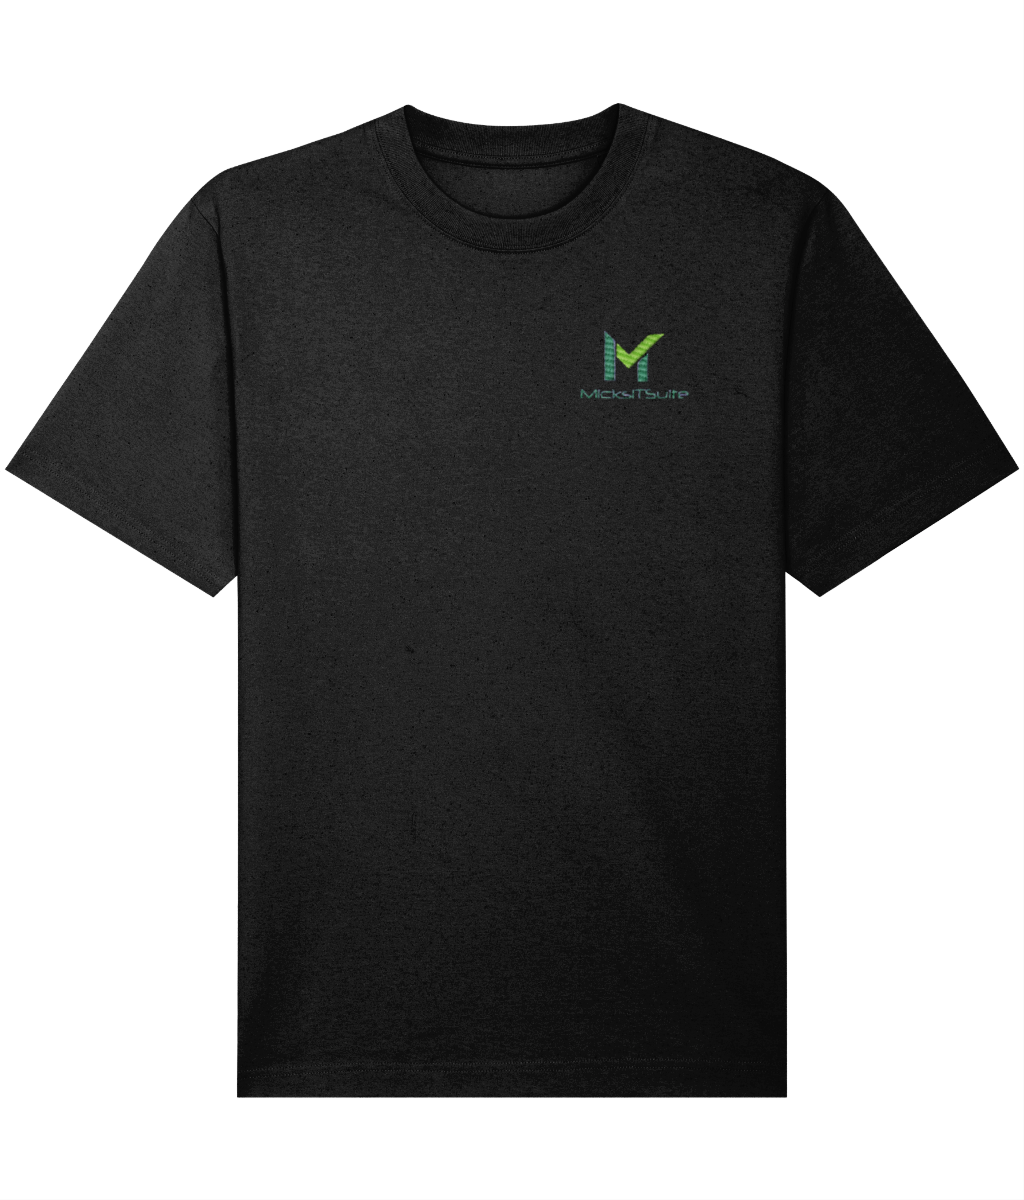 MicksITSuite - Solo - Black - Freestyler | Embroidered MicksITSuite Products